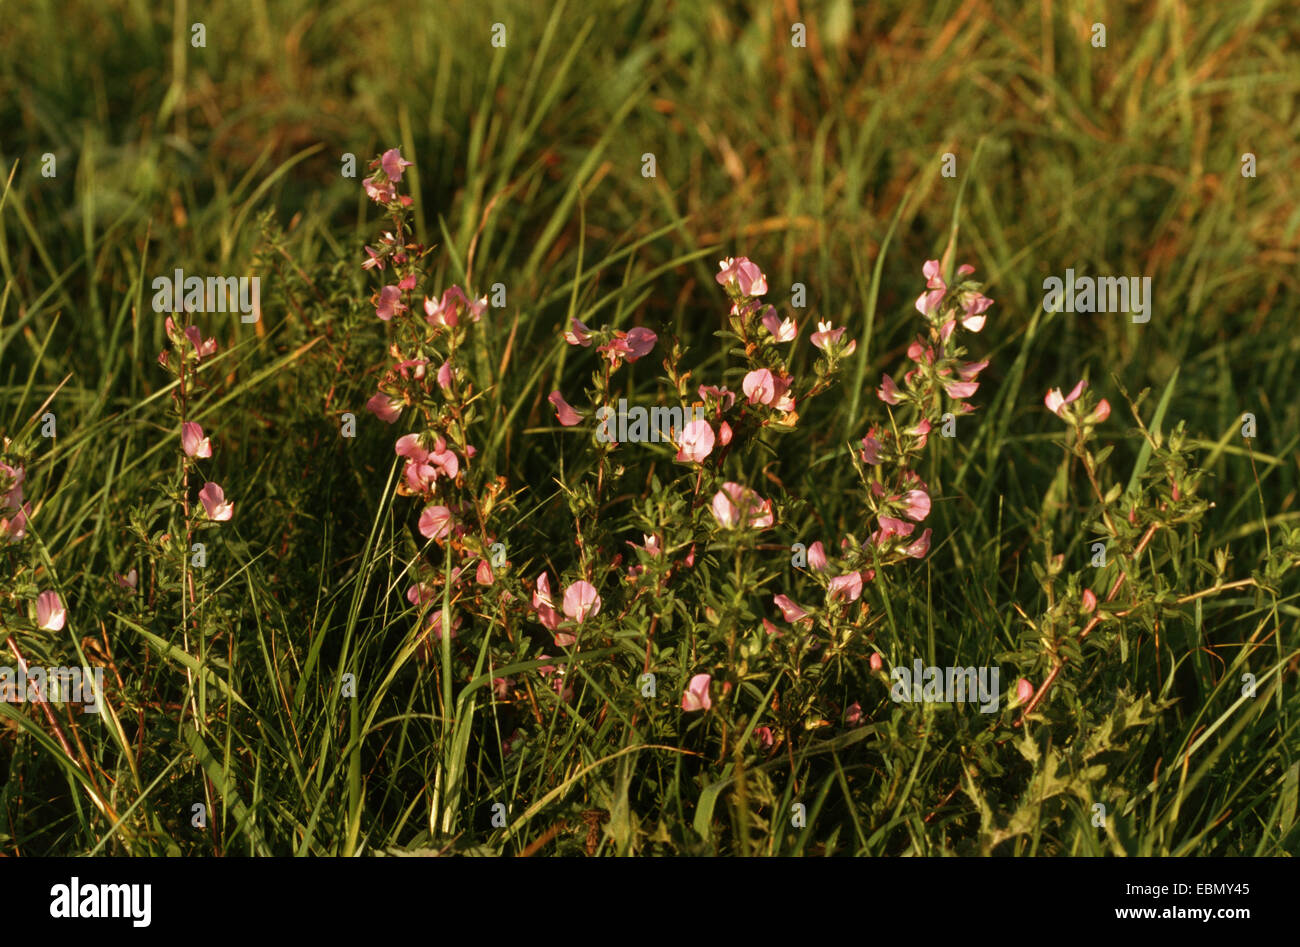 spiny restharrow (Ononis spinosa, Ononis spinosa subsp. spinosa), blooming, Germany Stock Photo